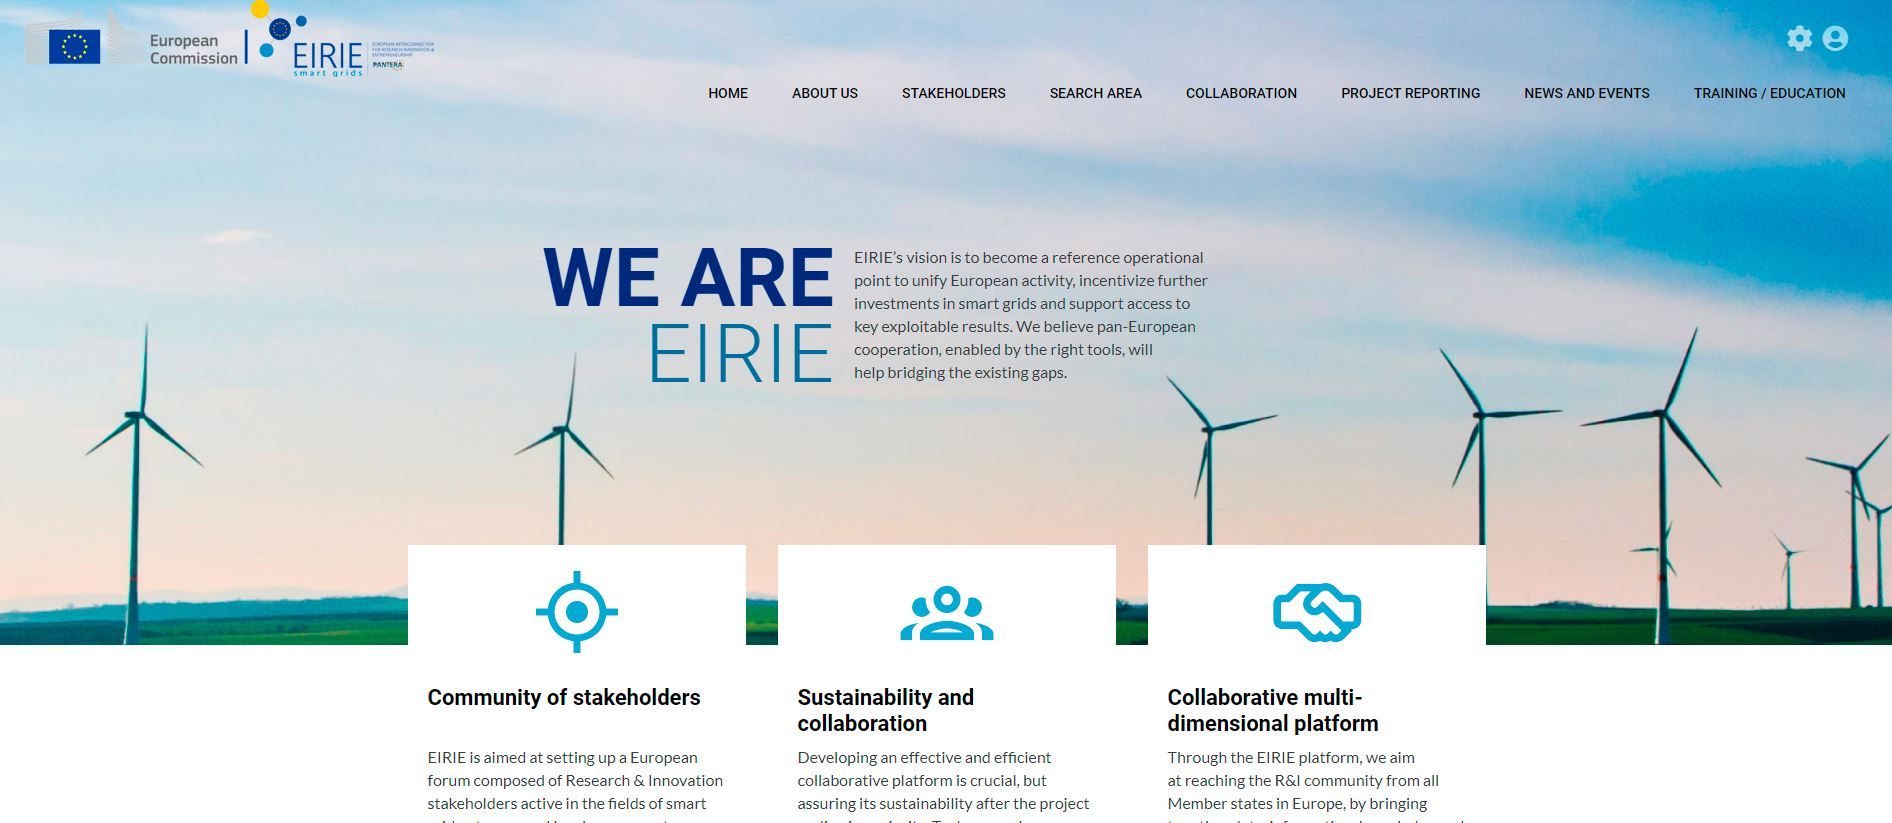 The PANTERA project presents the EIRIE Platform